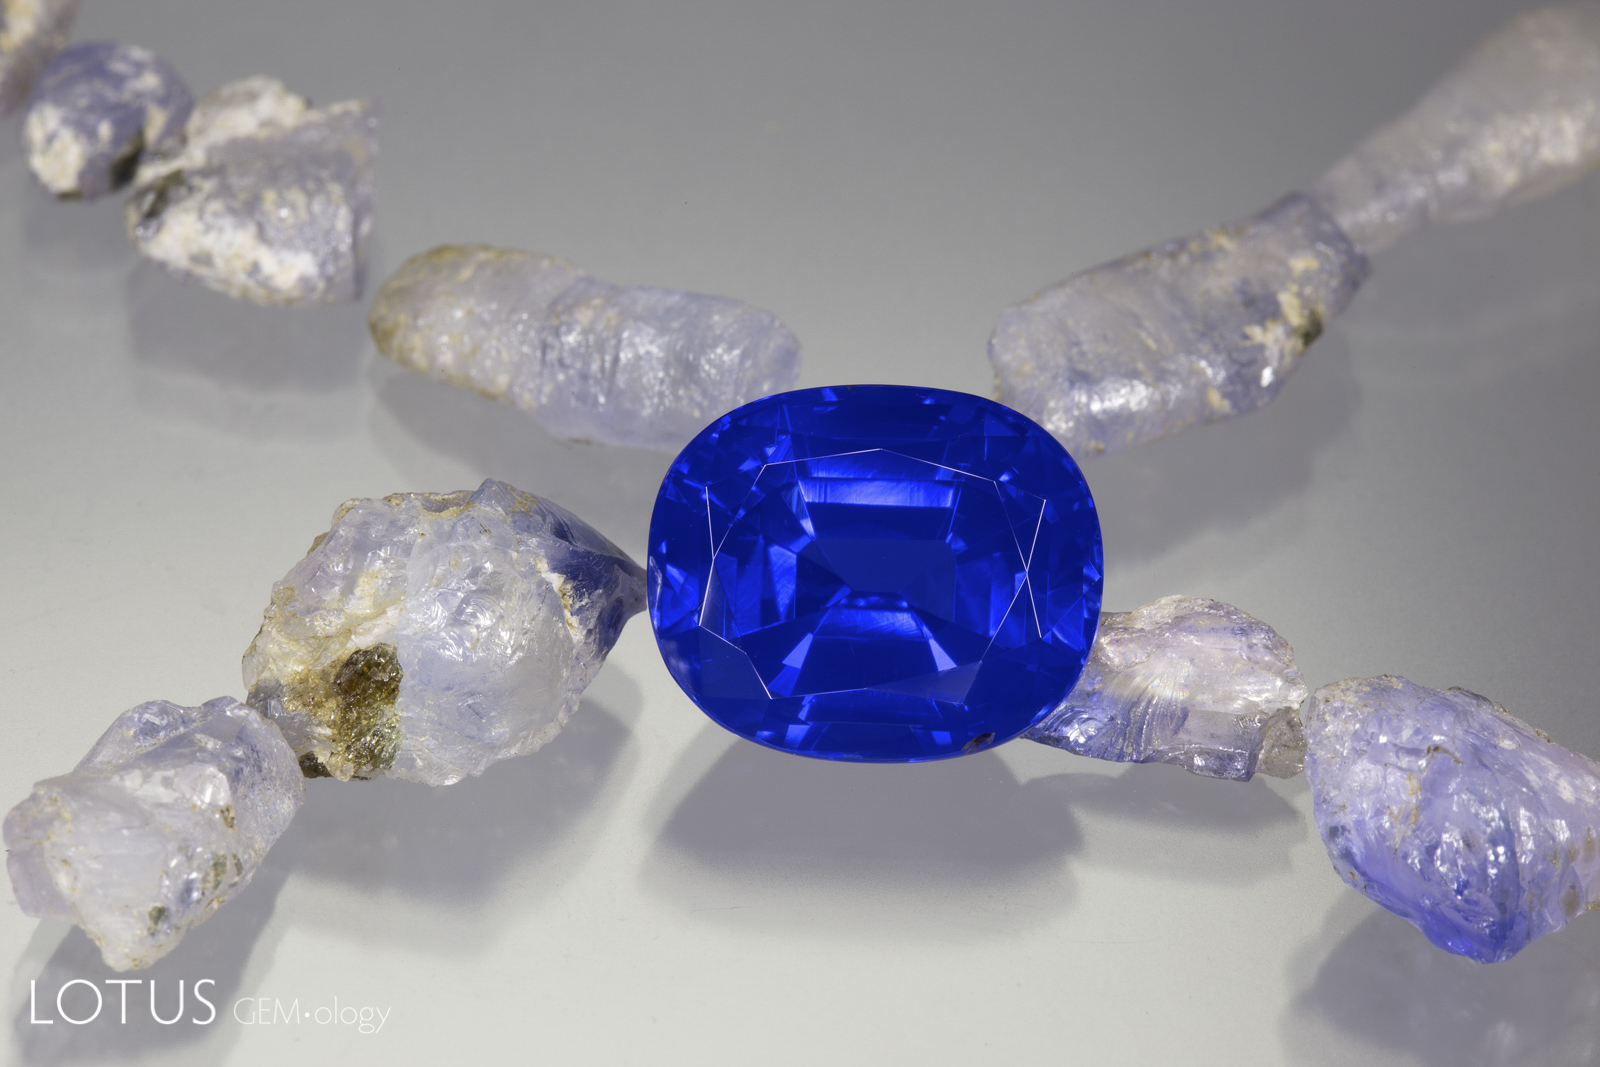 Is origin important? Yes, the rough sapphires do hail from India’s famous Kashmir mines. But the 14 ct cut stone is from Madagascar. What do you want? A poor quality sapphire from Kashmir or a magnificent blue beauty from Madagascar? As a friend of mine said long ago, only inclusion collectors should buy based on origin. Photo: Wimon Manorotkul. 